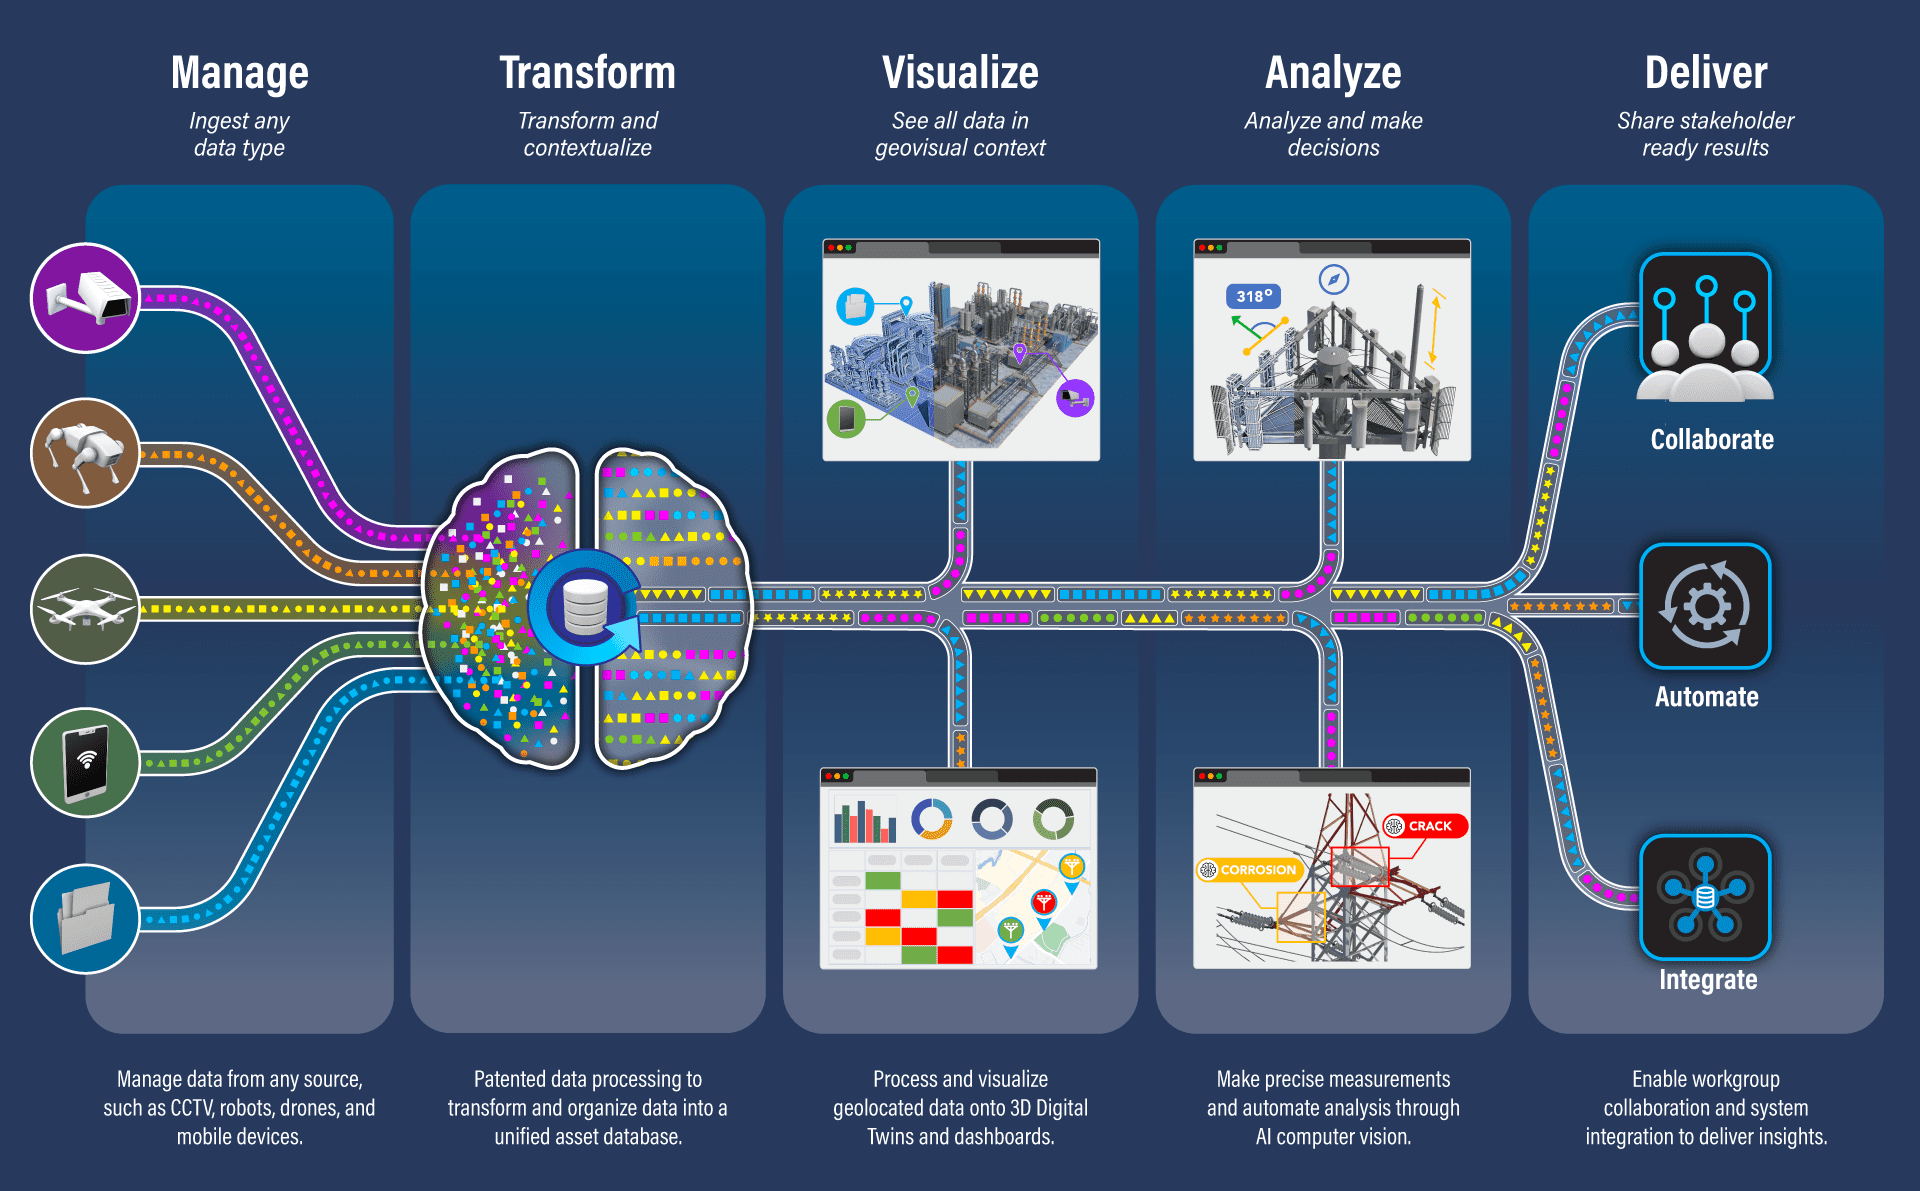 Manage, Transform, Visualize, Analyze, and Deliver